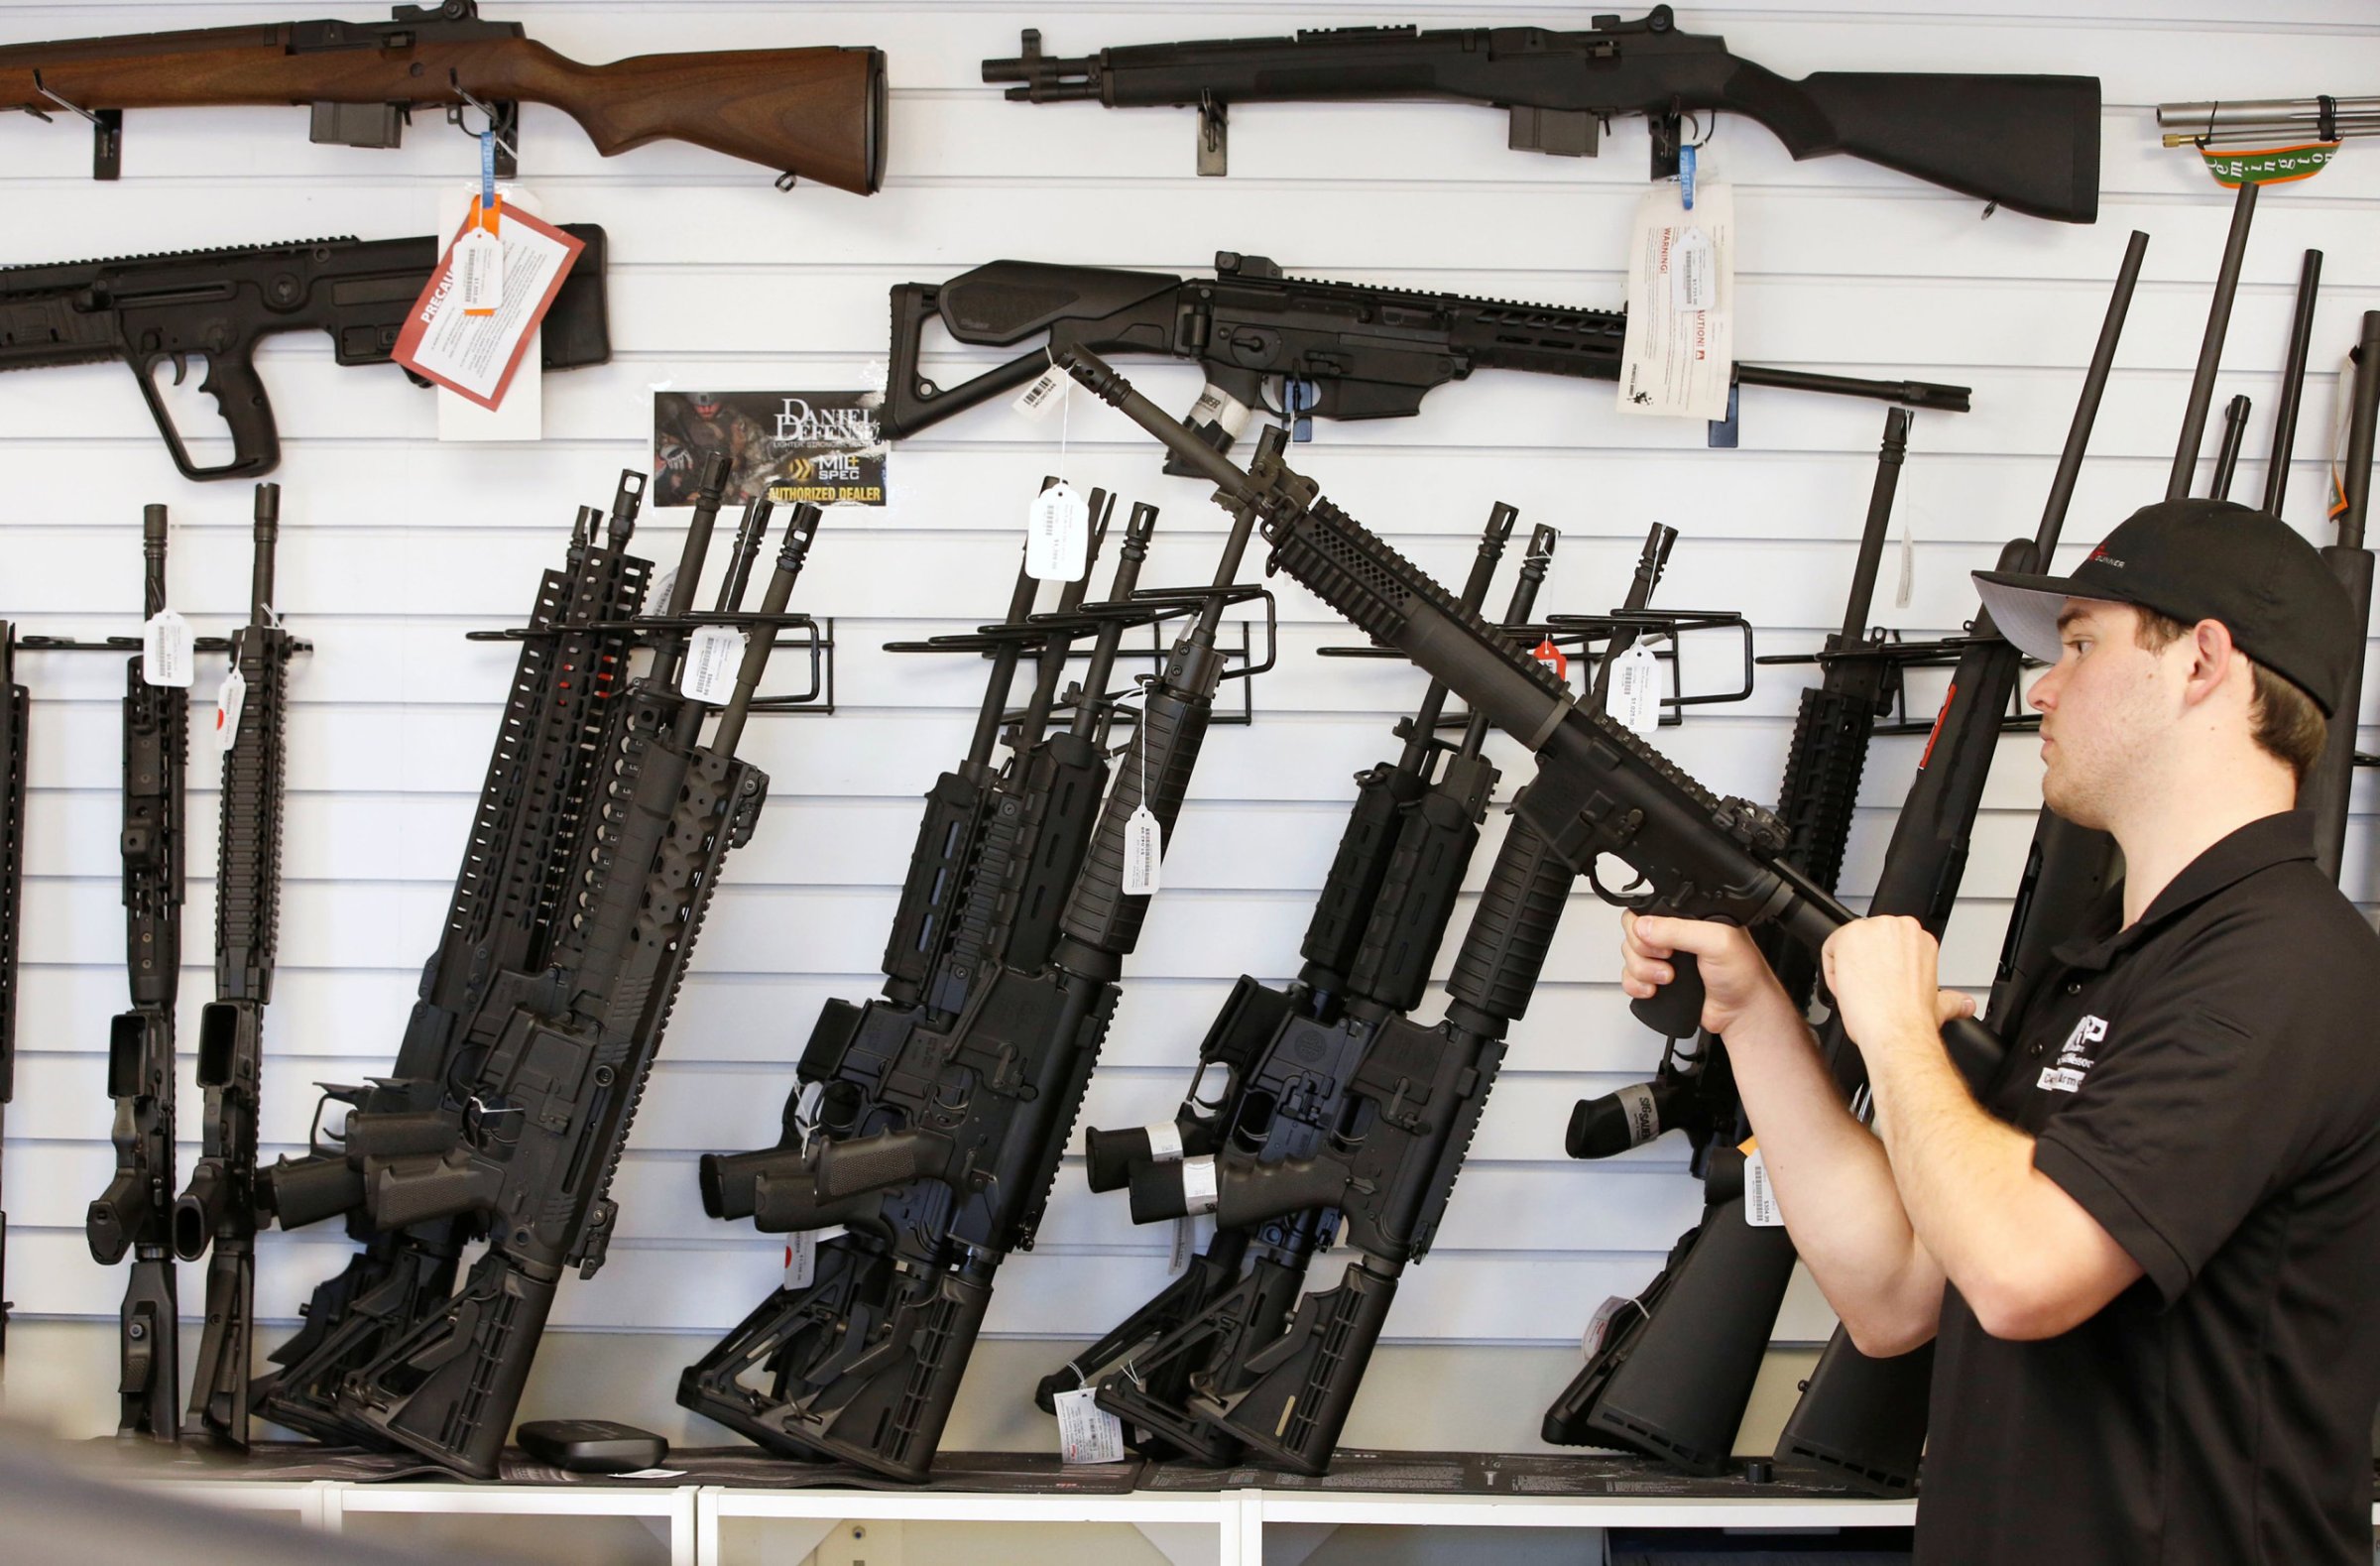 A salesman clears the chamber of an AR-15 at the "Ready Gunner" gun store in Provo, Utah on June 21, 2016.